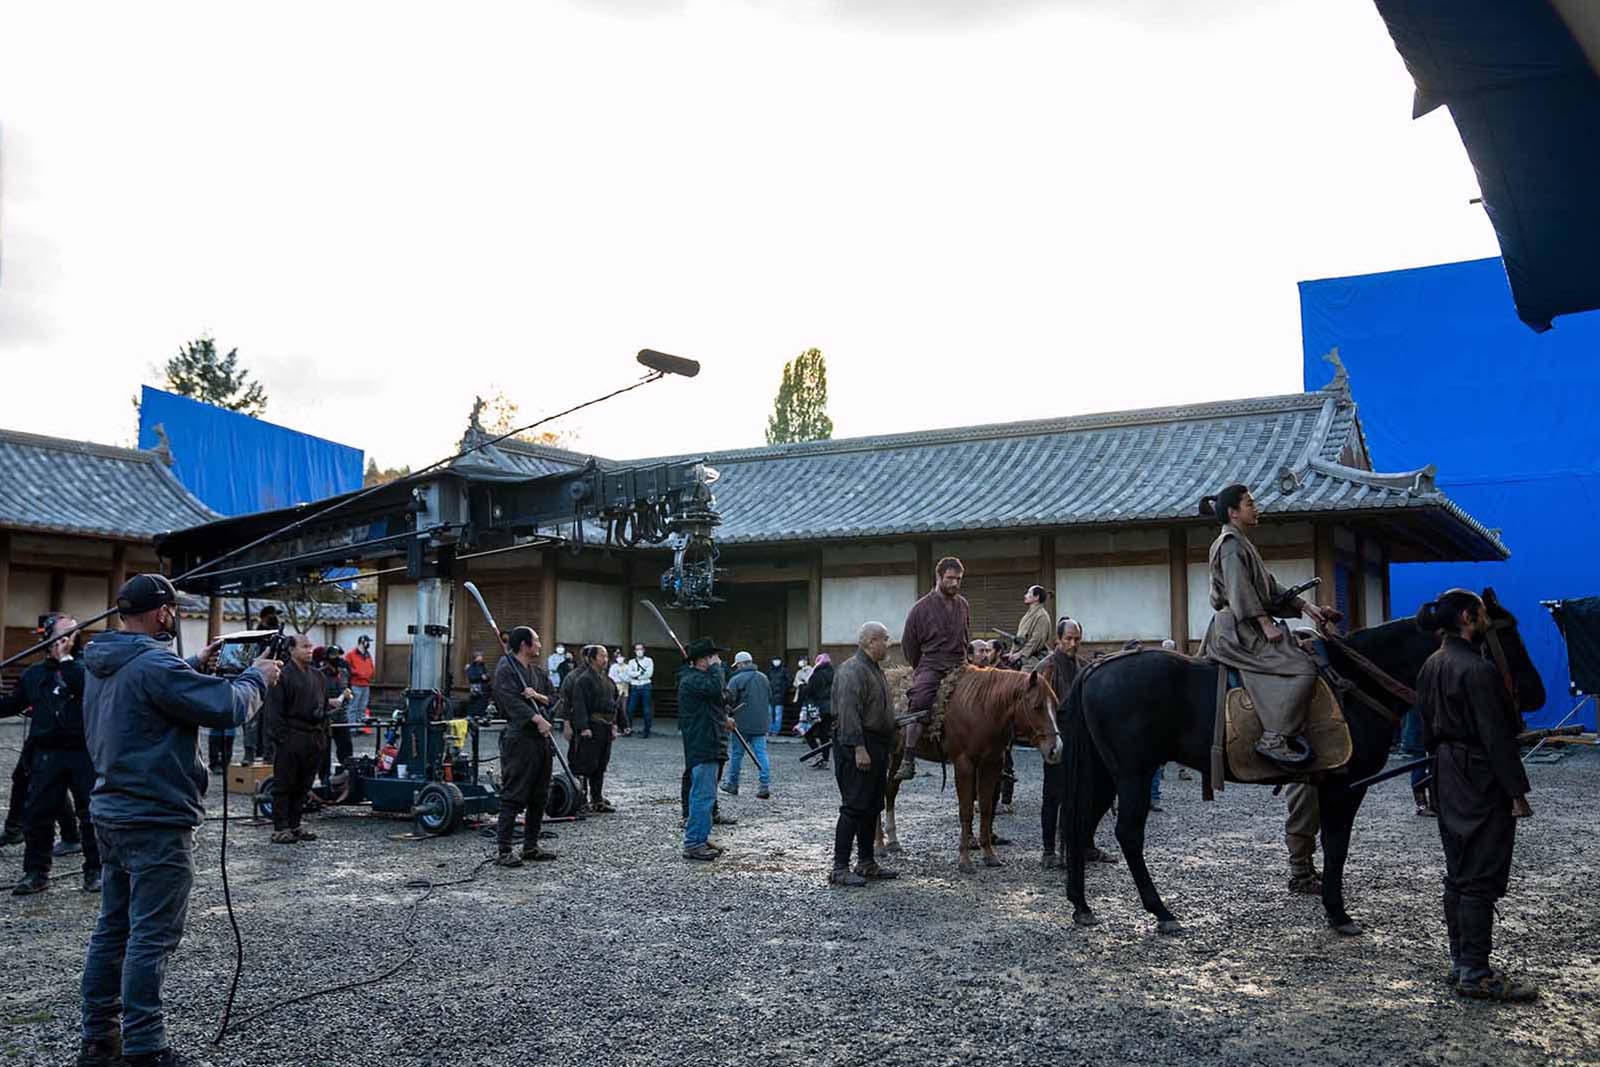 Although Shogun is set in Japan, the entire production was filmed in British Columbia. Image © FX